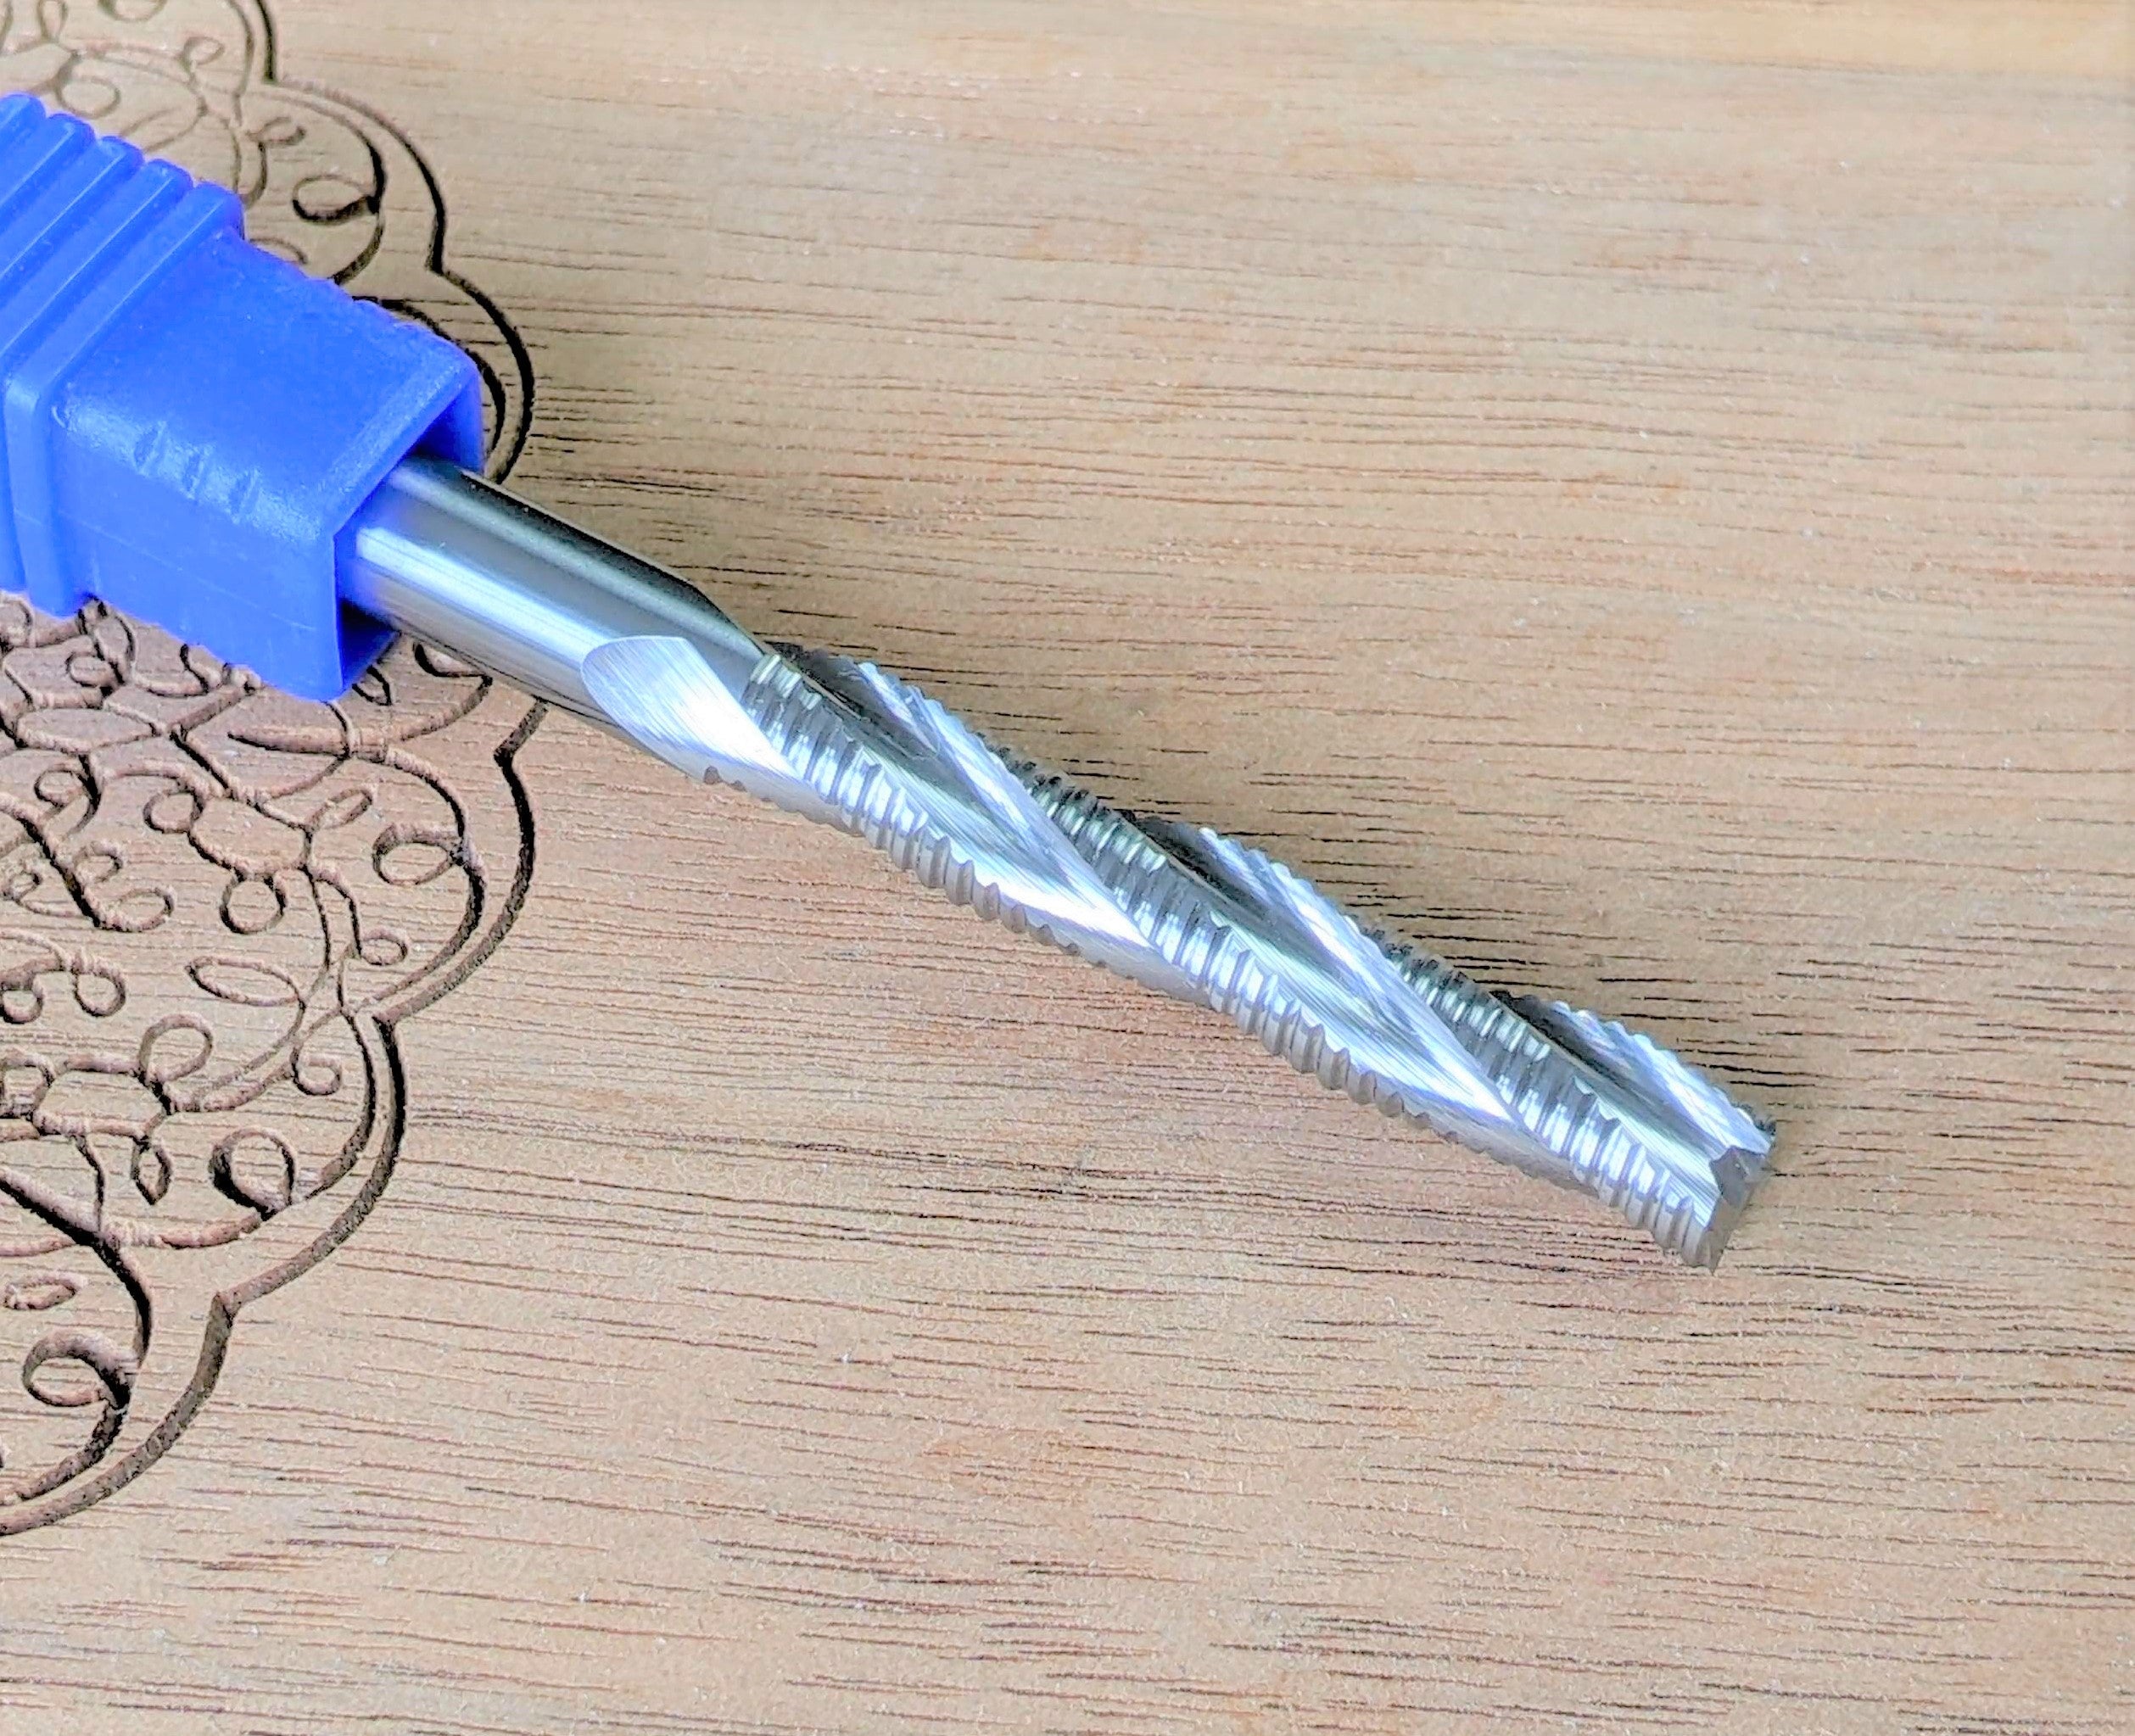 idc woodcraft 1/4" roughing bit for cnc routers